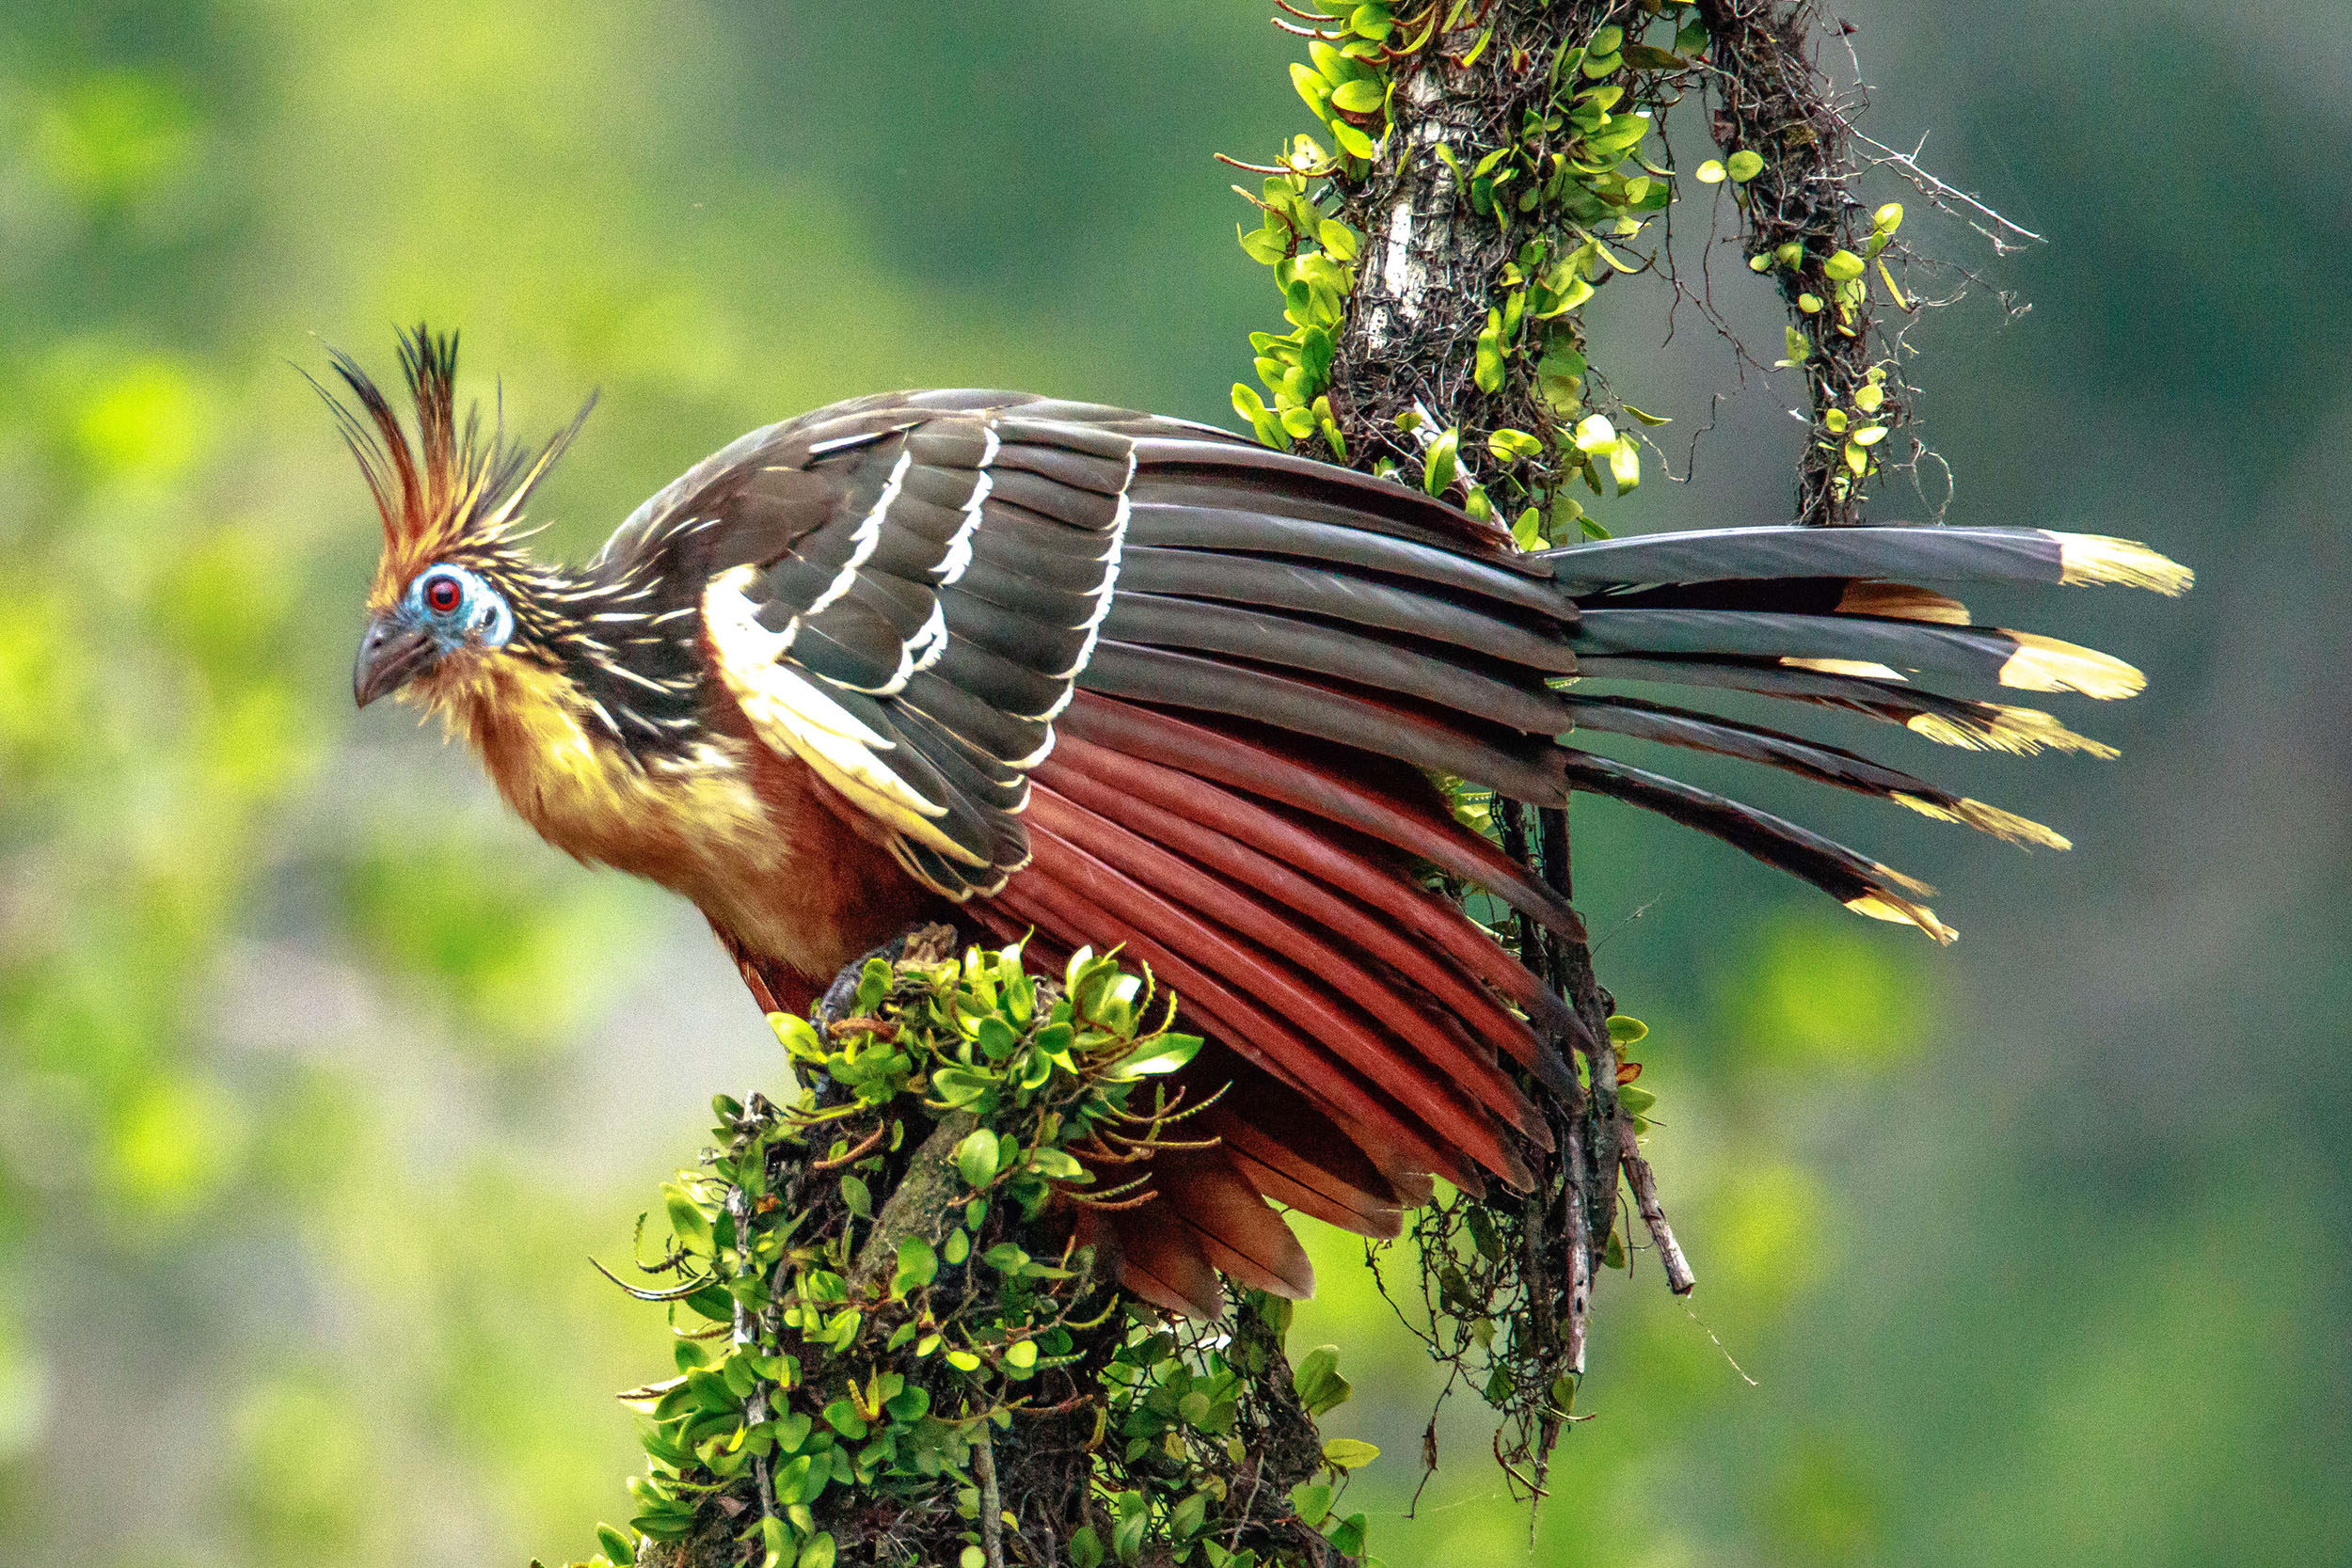 Hoatzin perched on a branch. It has ornate colourful plumage and an amazing feather crest on its head